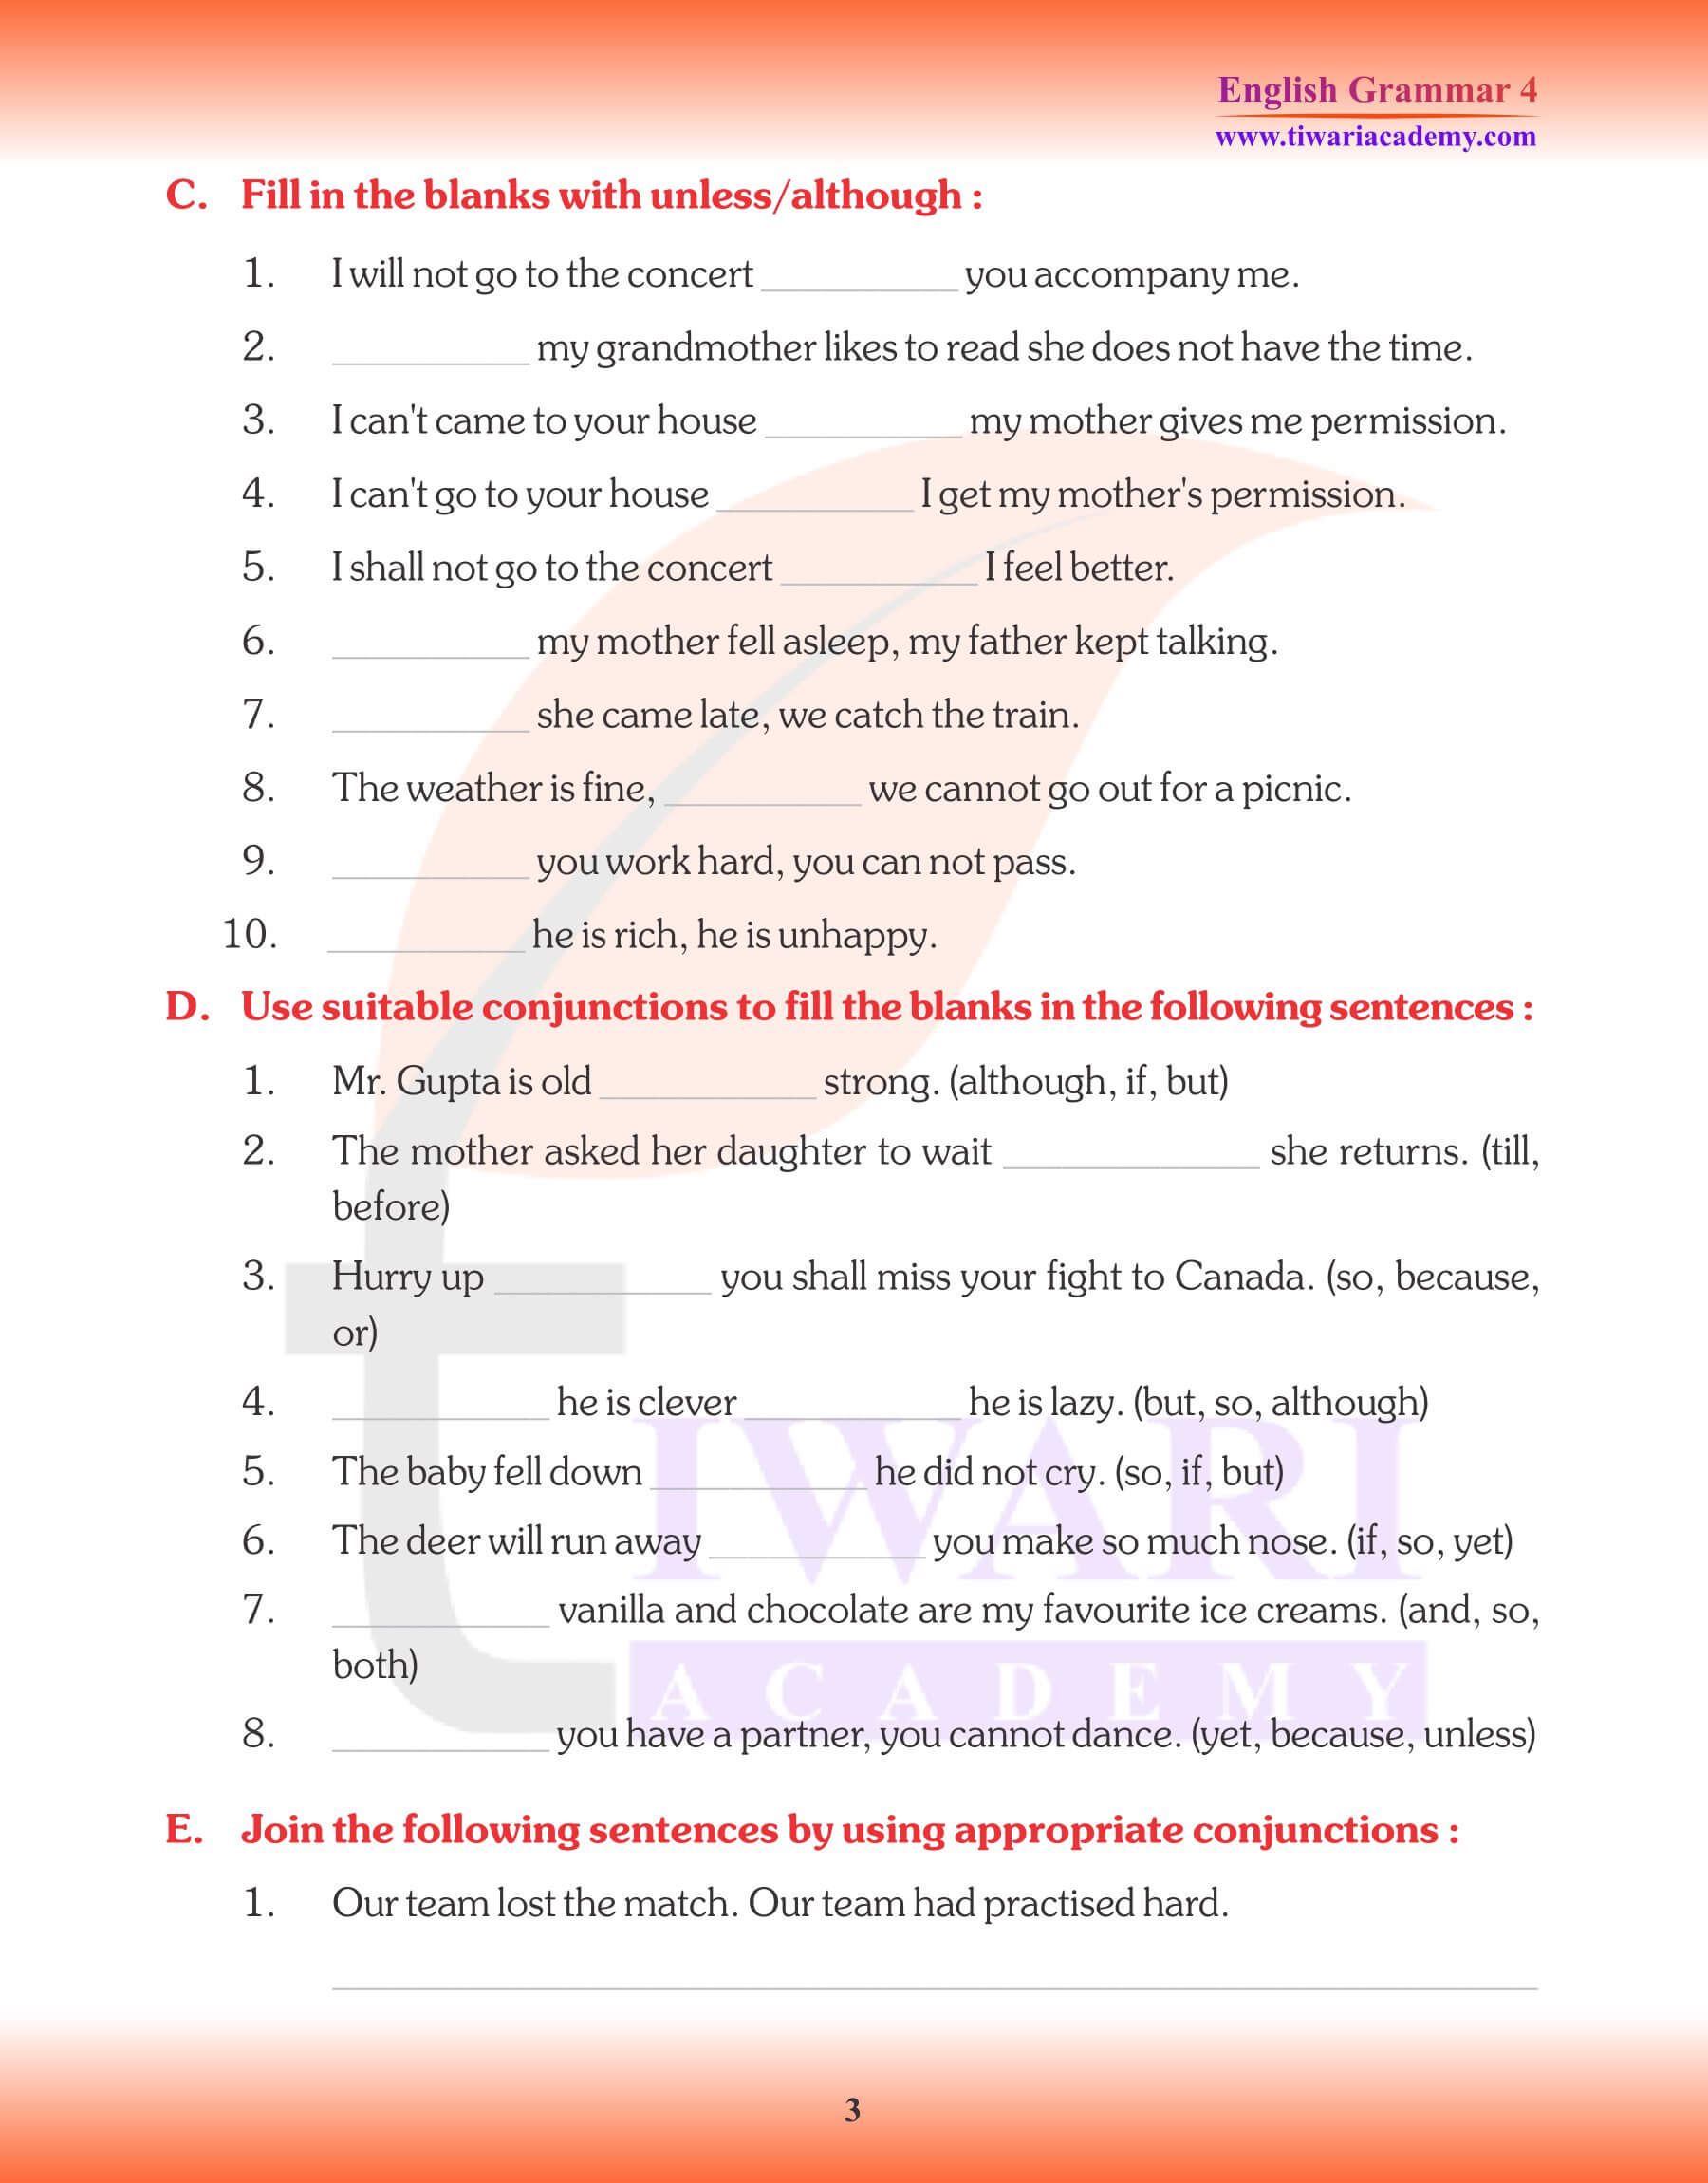 Class 4 English Grammar Conjunctions Assignments